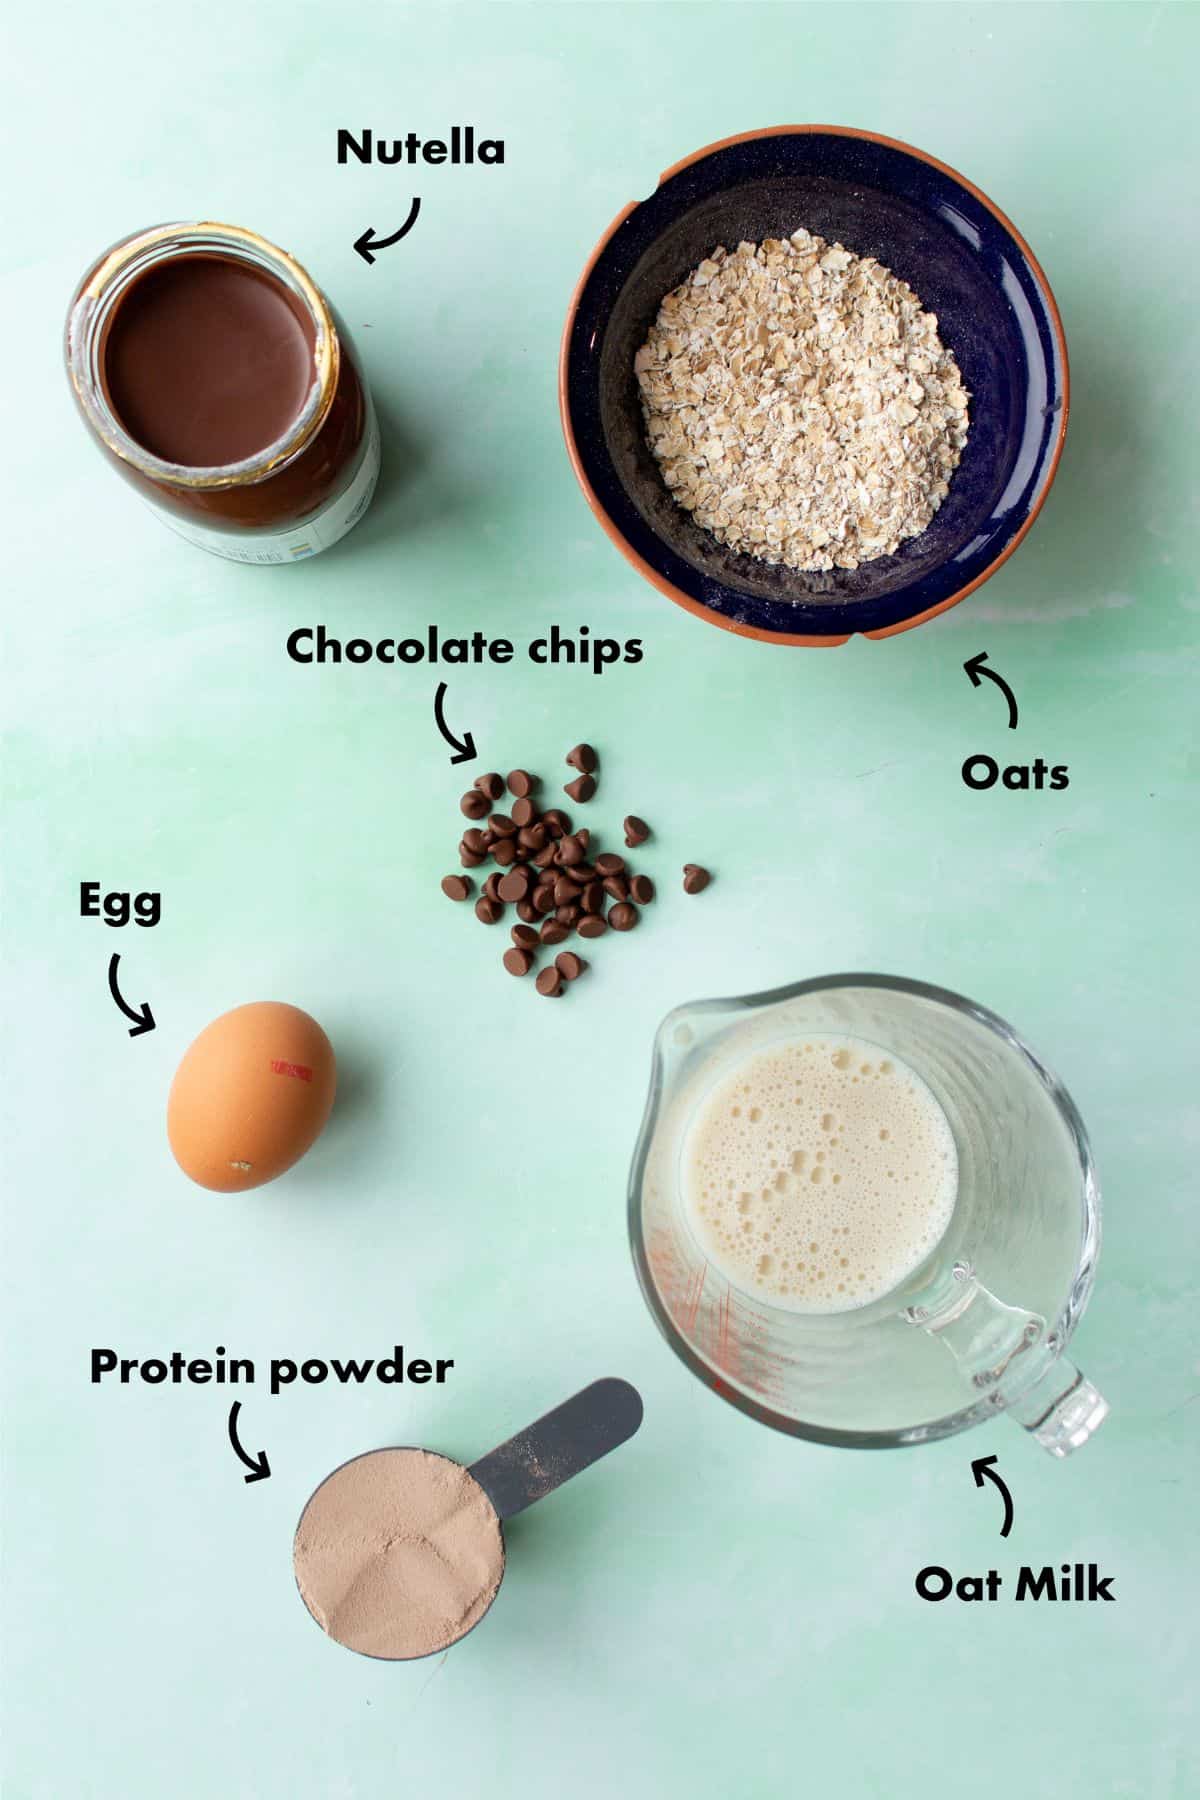 Ingredients to make the choclate baked oats laid out on a pale blue background and labelled.